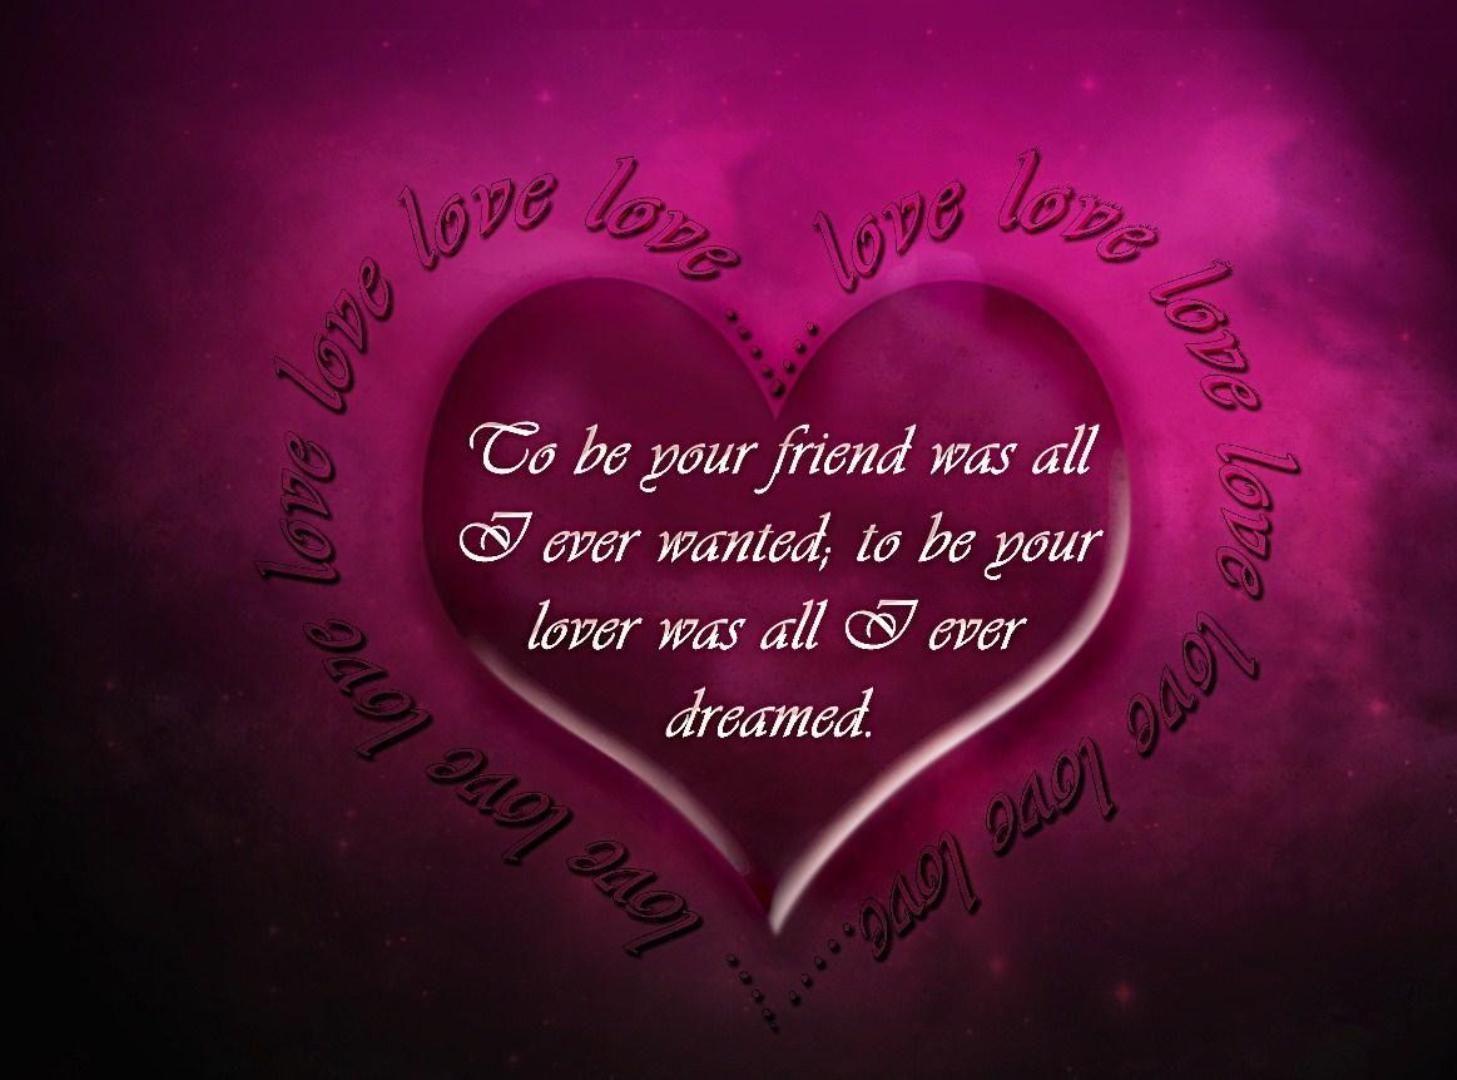 Valentine's Day Quotes HD Wallpaper 2016 Free Download. Love